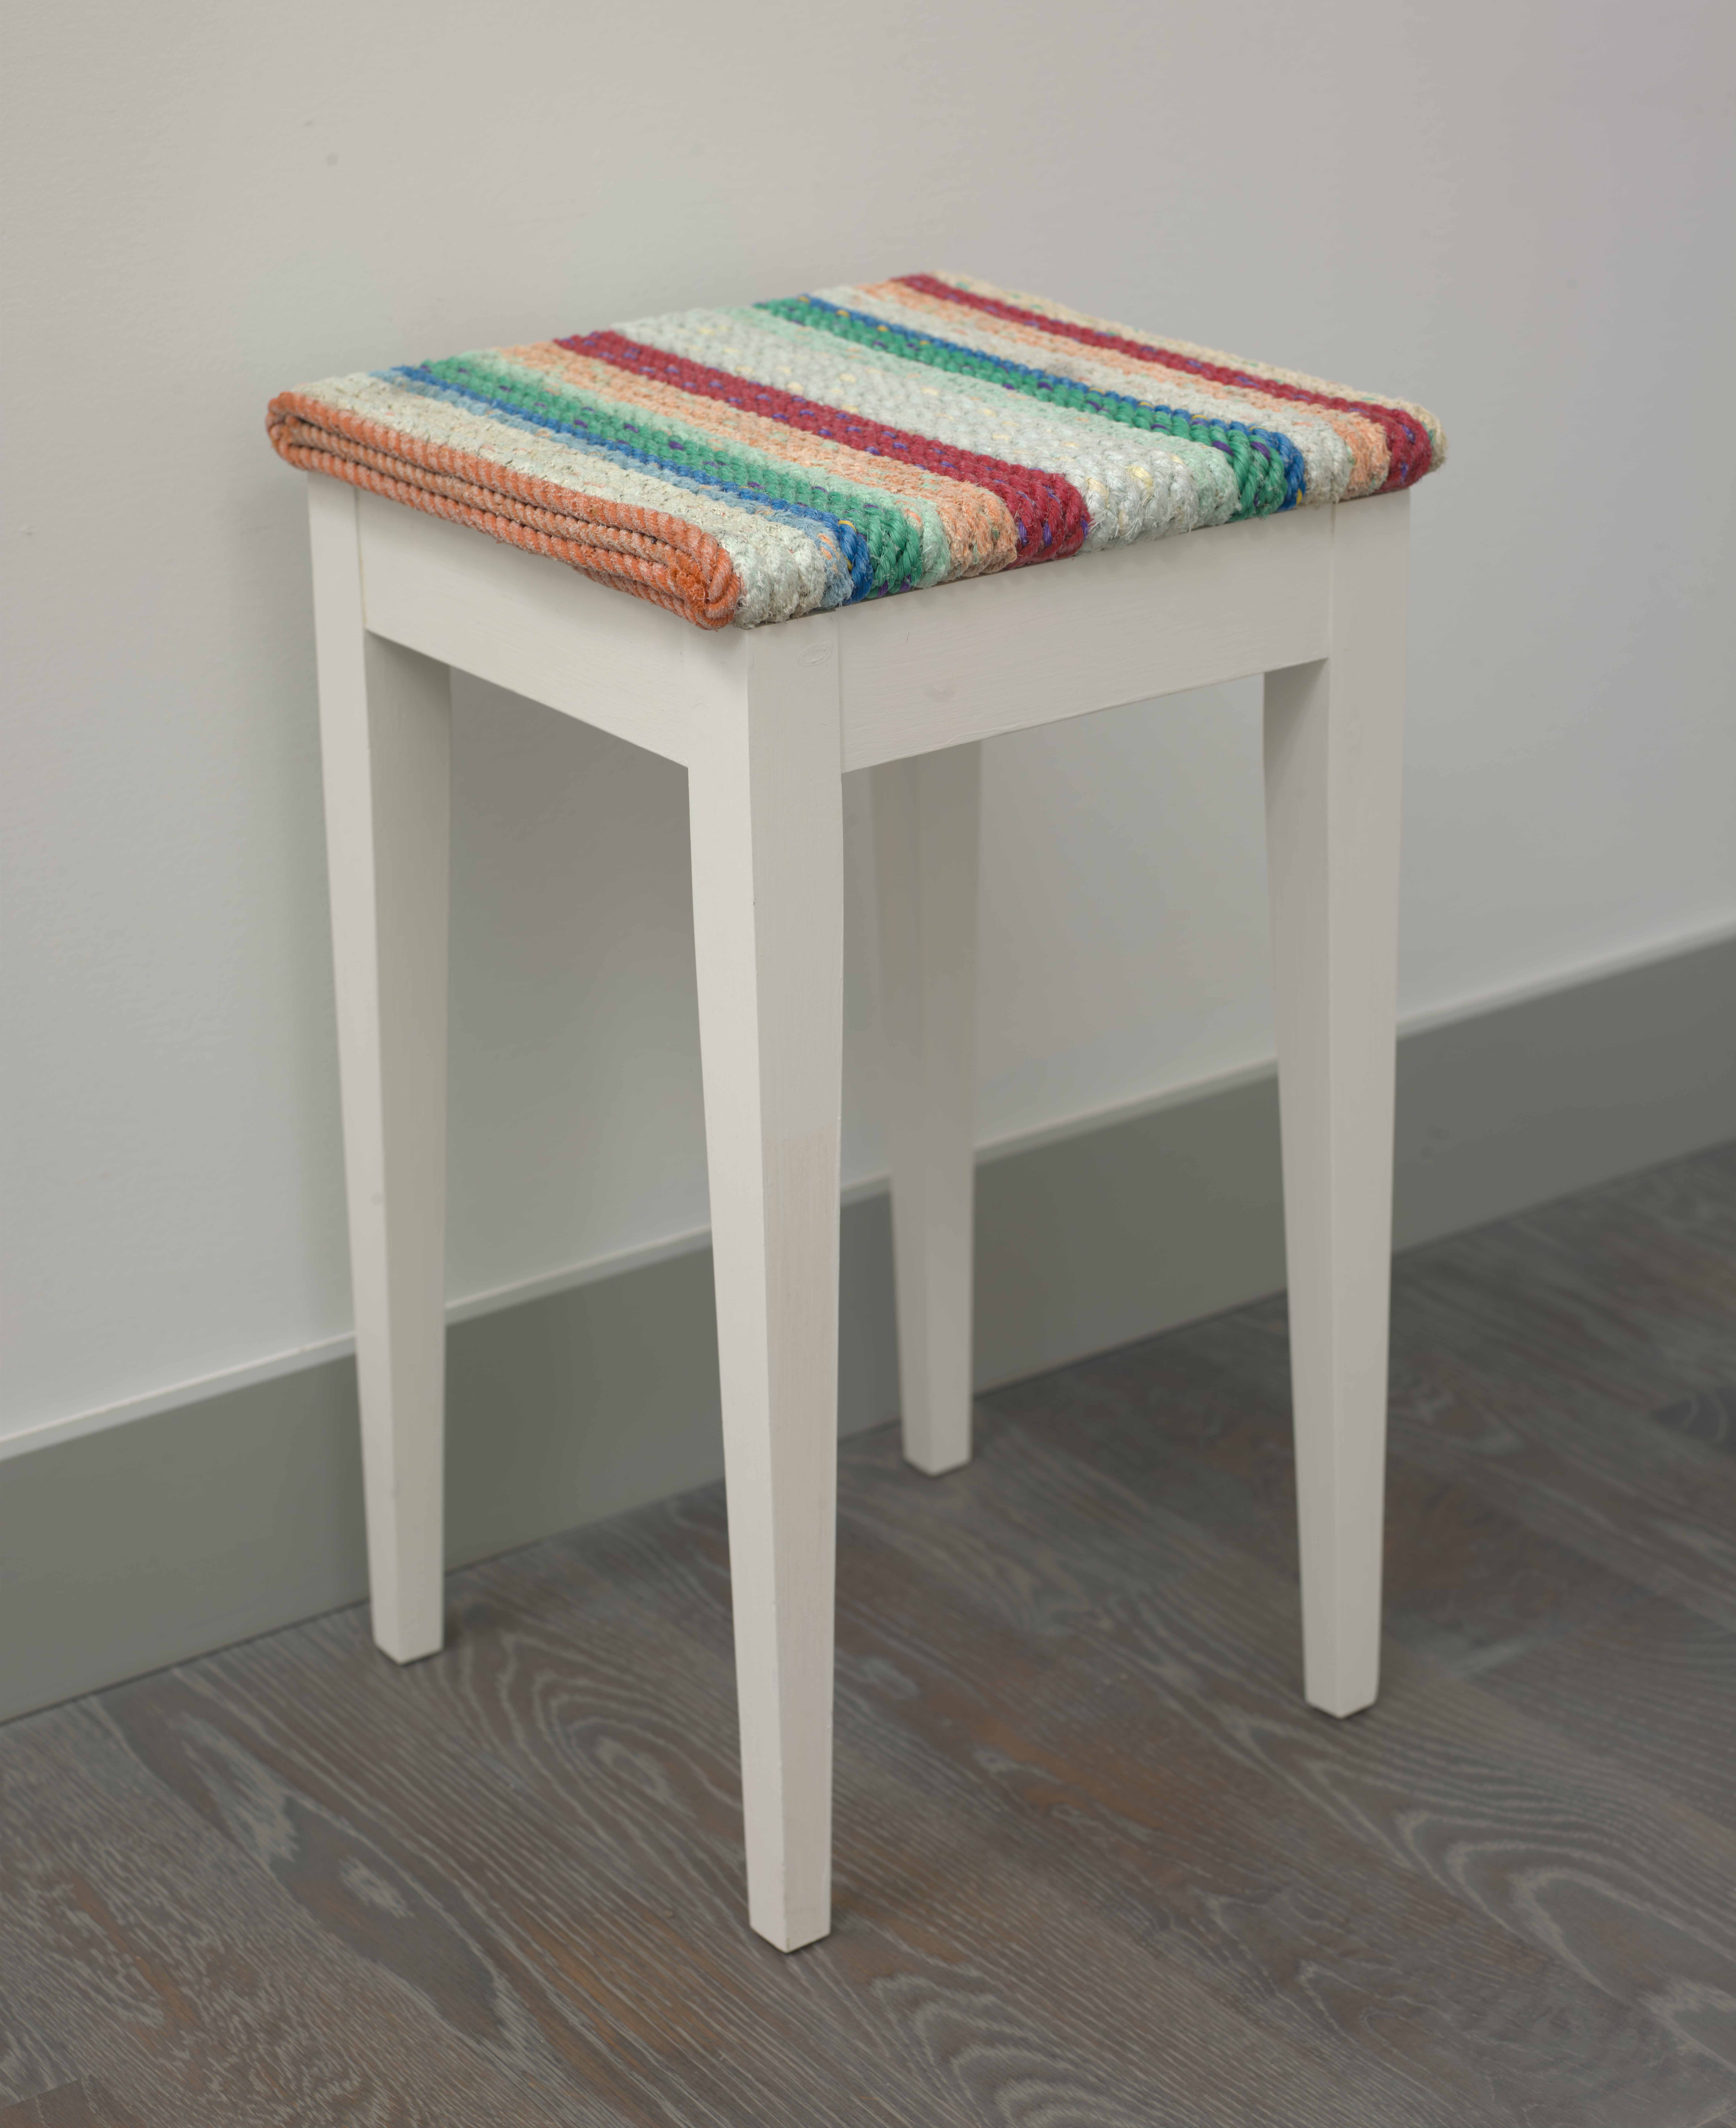 Floating Rope Side Table, 2020, mixed media, 24 x 14 x 14 inches